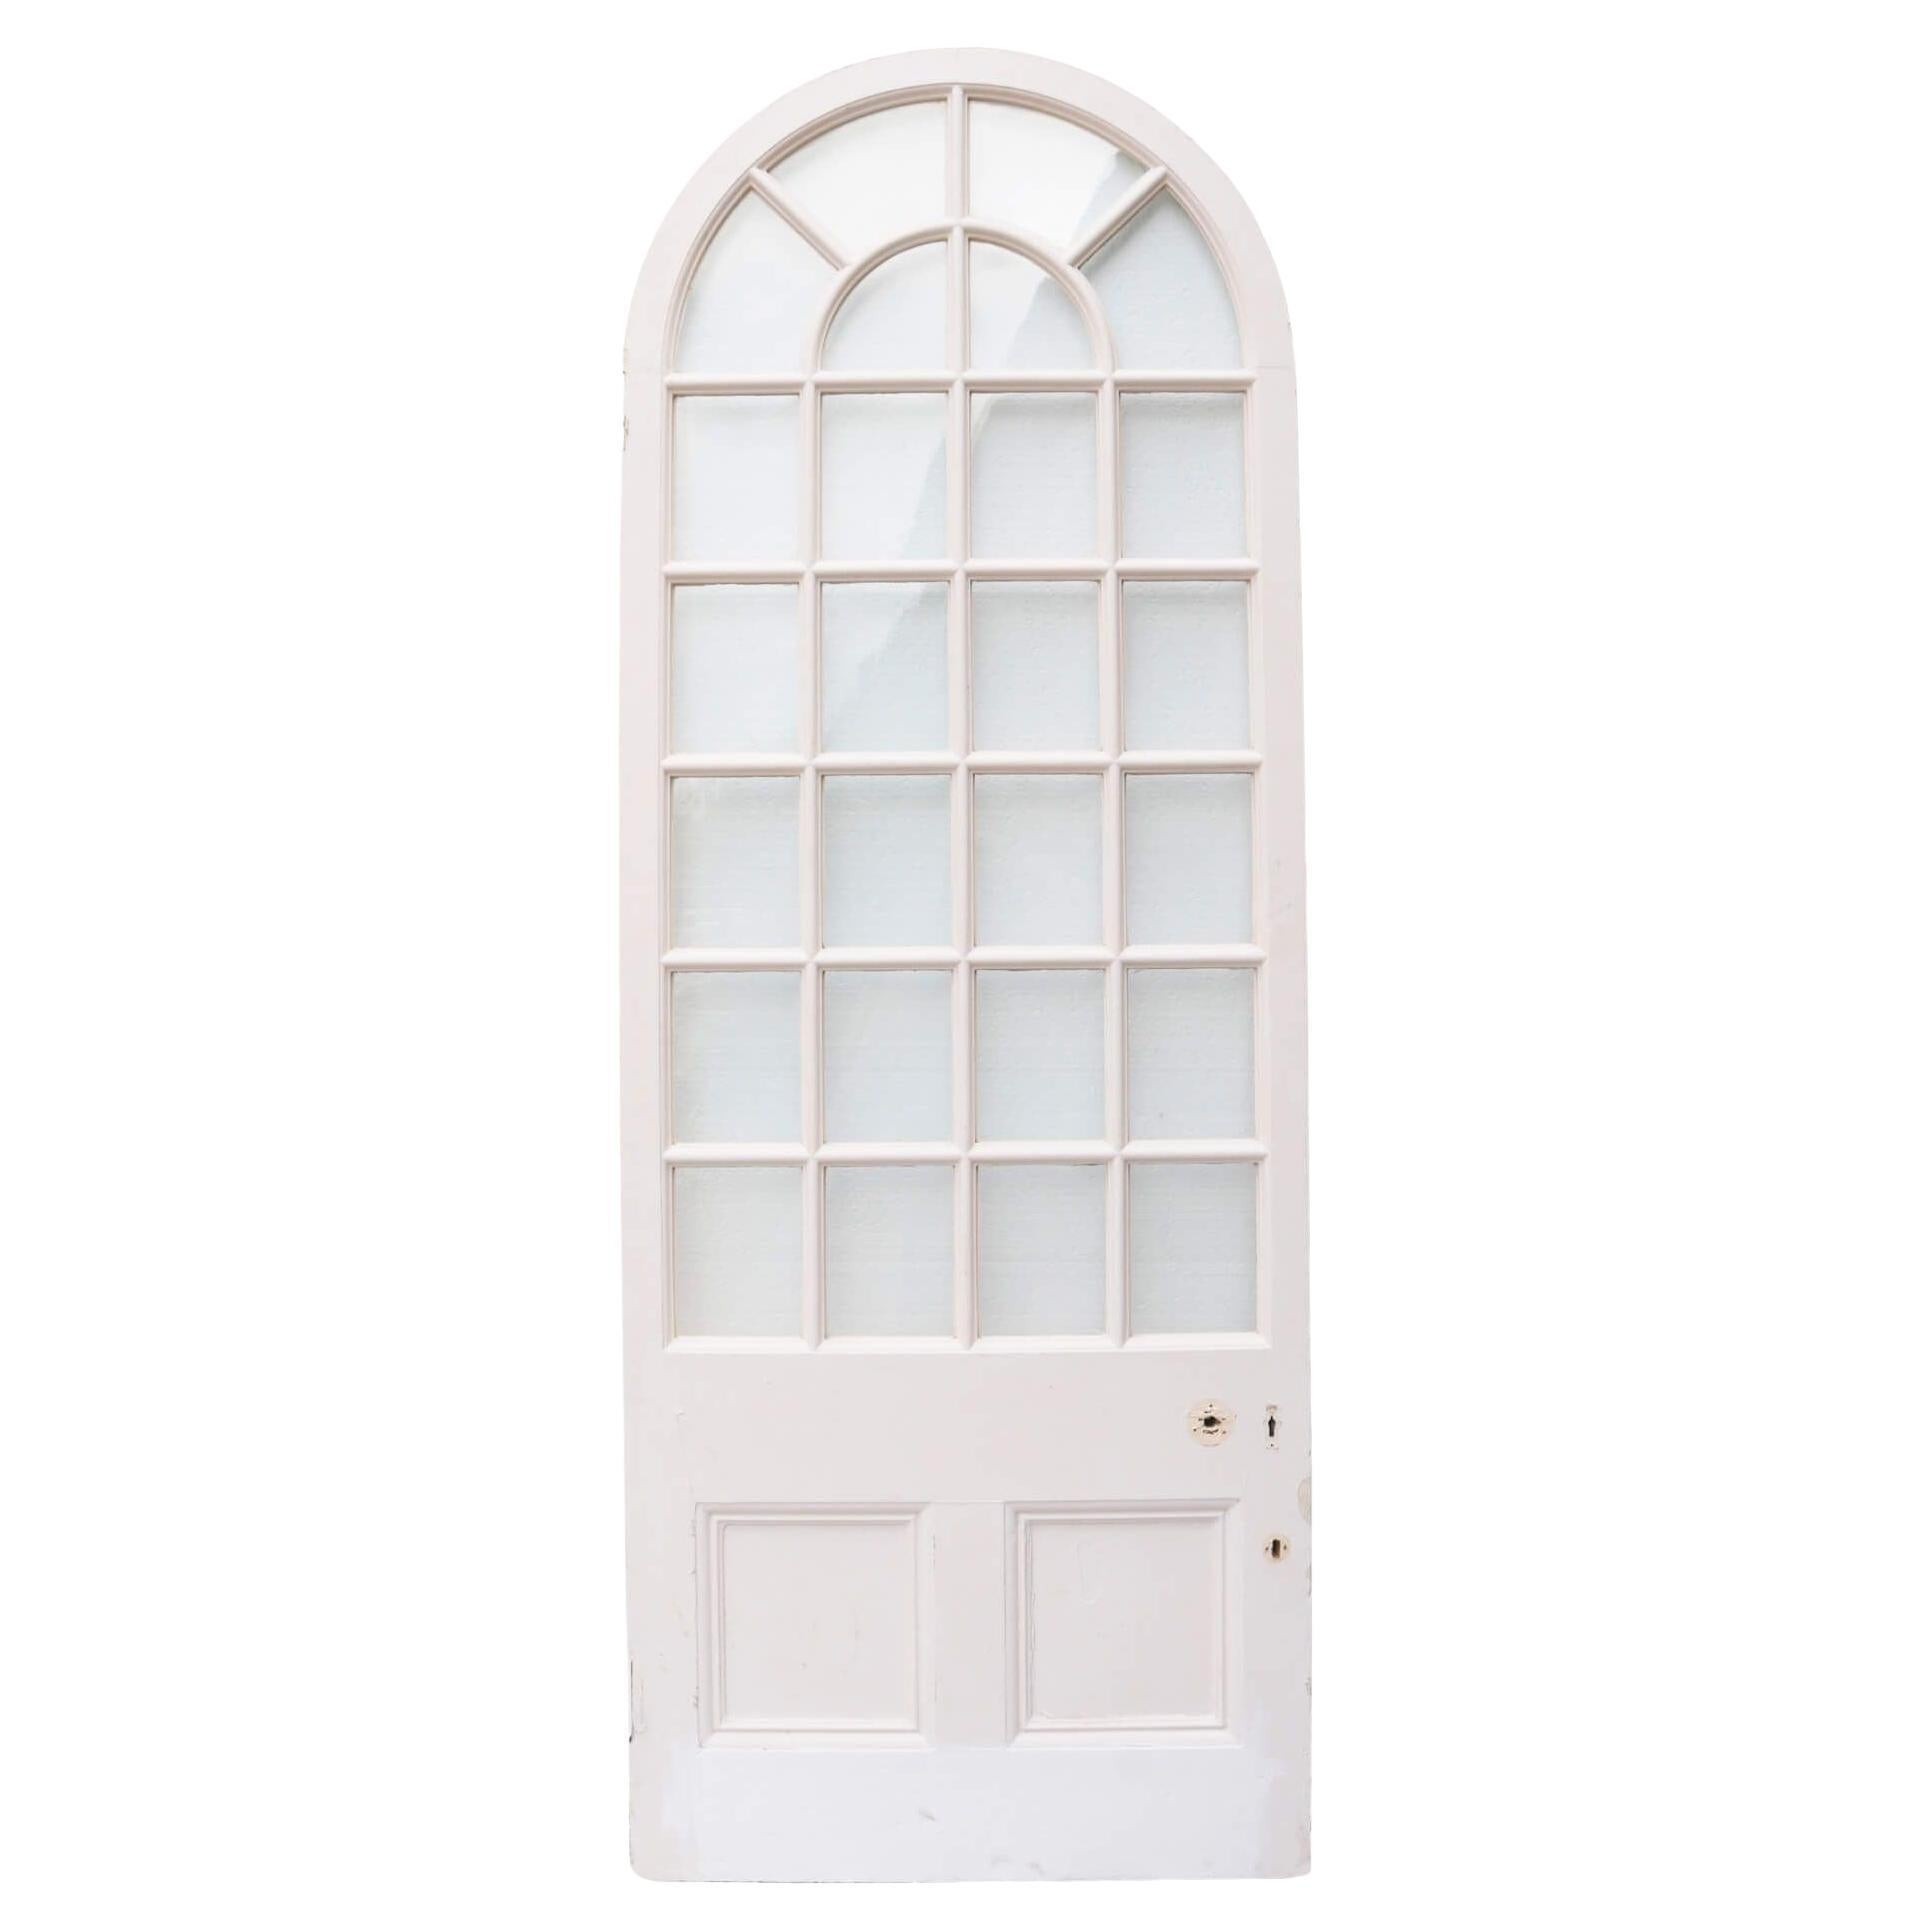 Antique Victorian White Arched Glazed Door For Sale